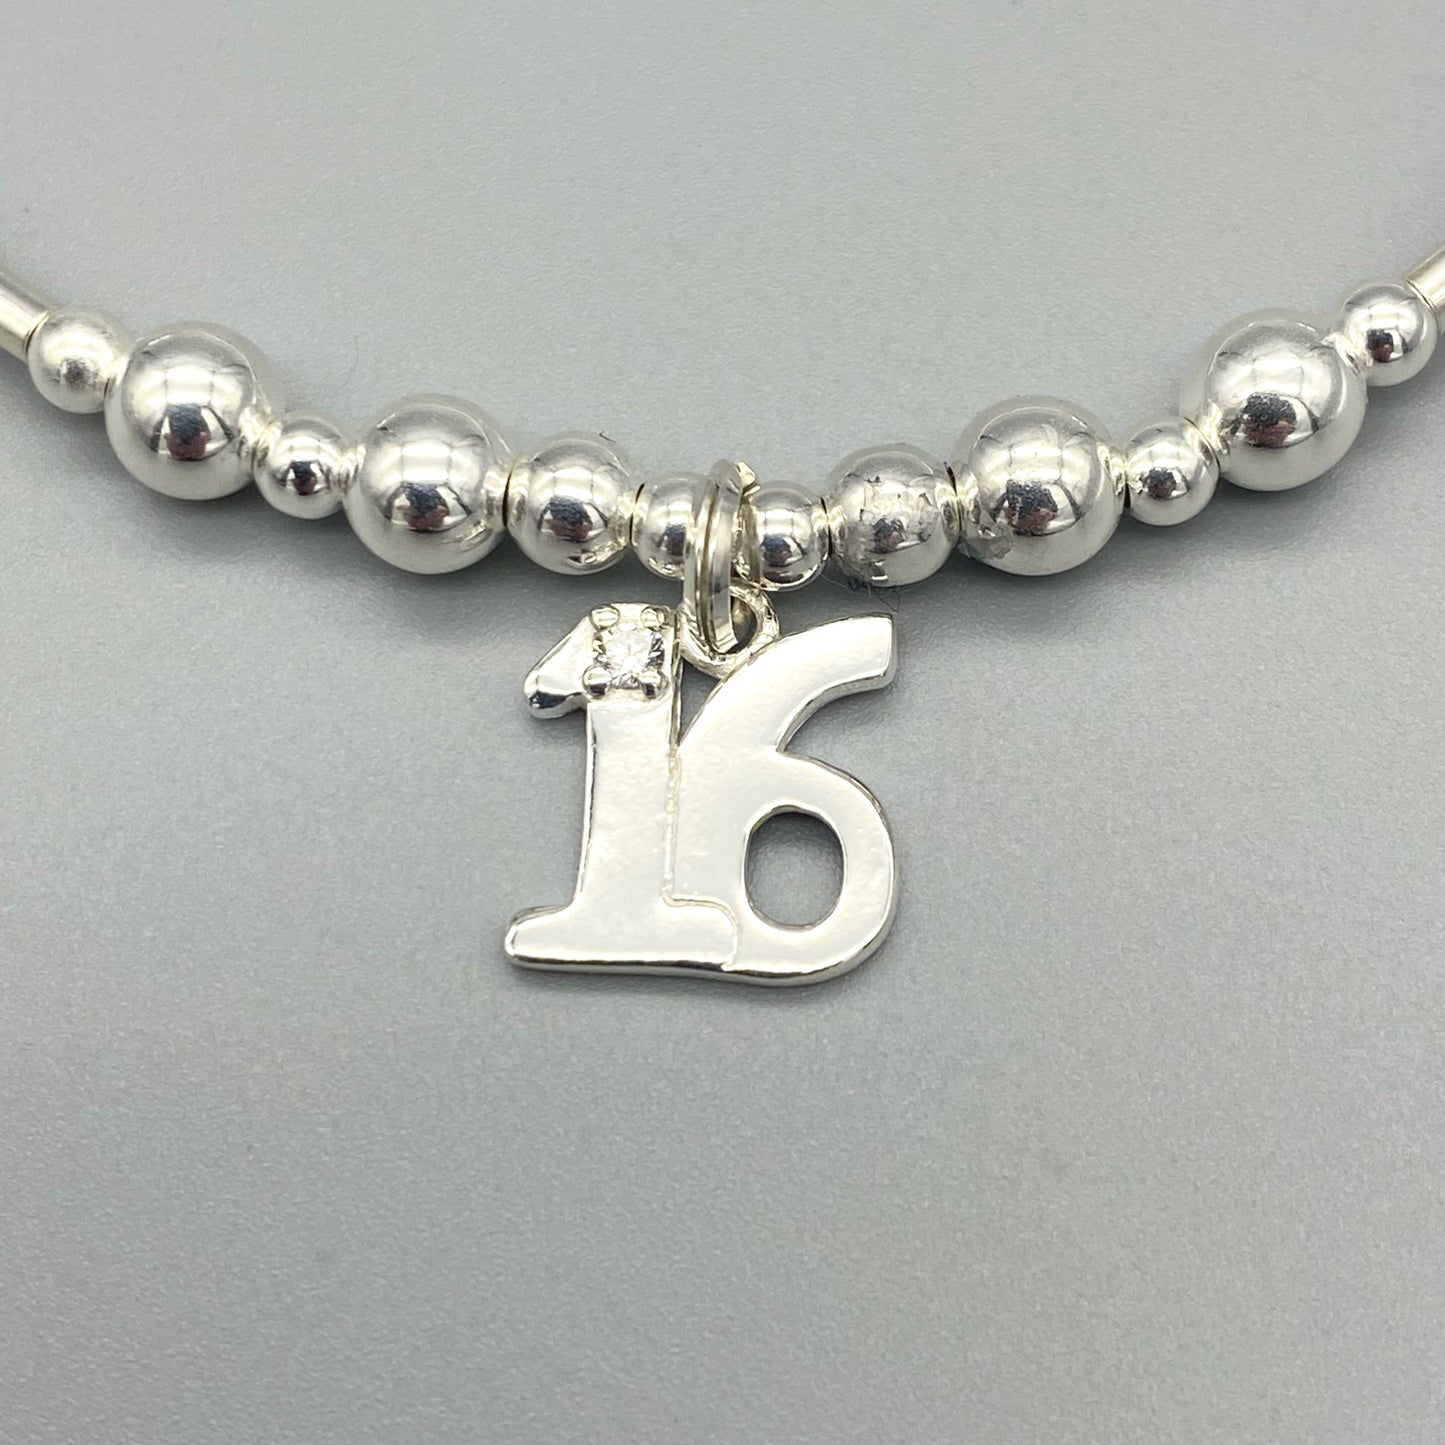 Closeup of 16th birthday charm sterling silver girl's stacking bracelet by My Silver Wish